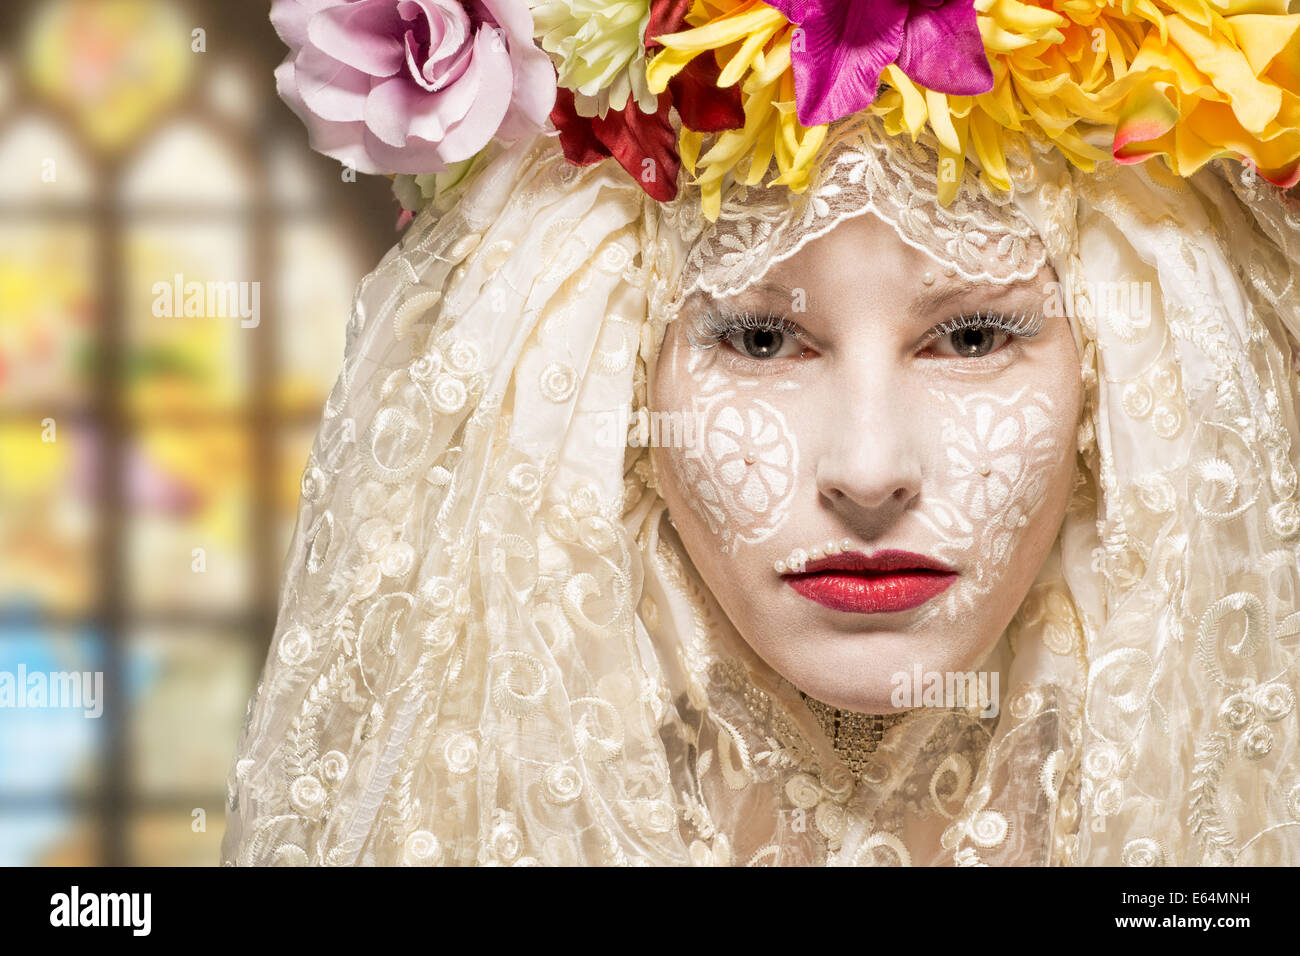 Mysterious woman in lace and flowers Stock Photo